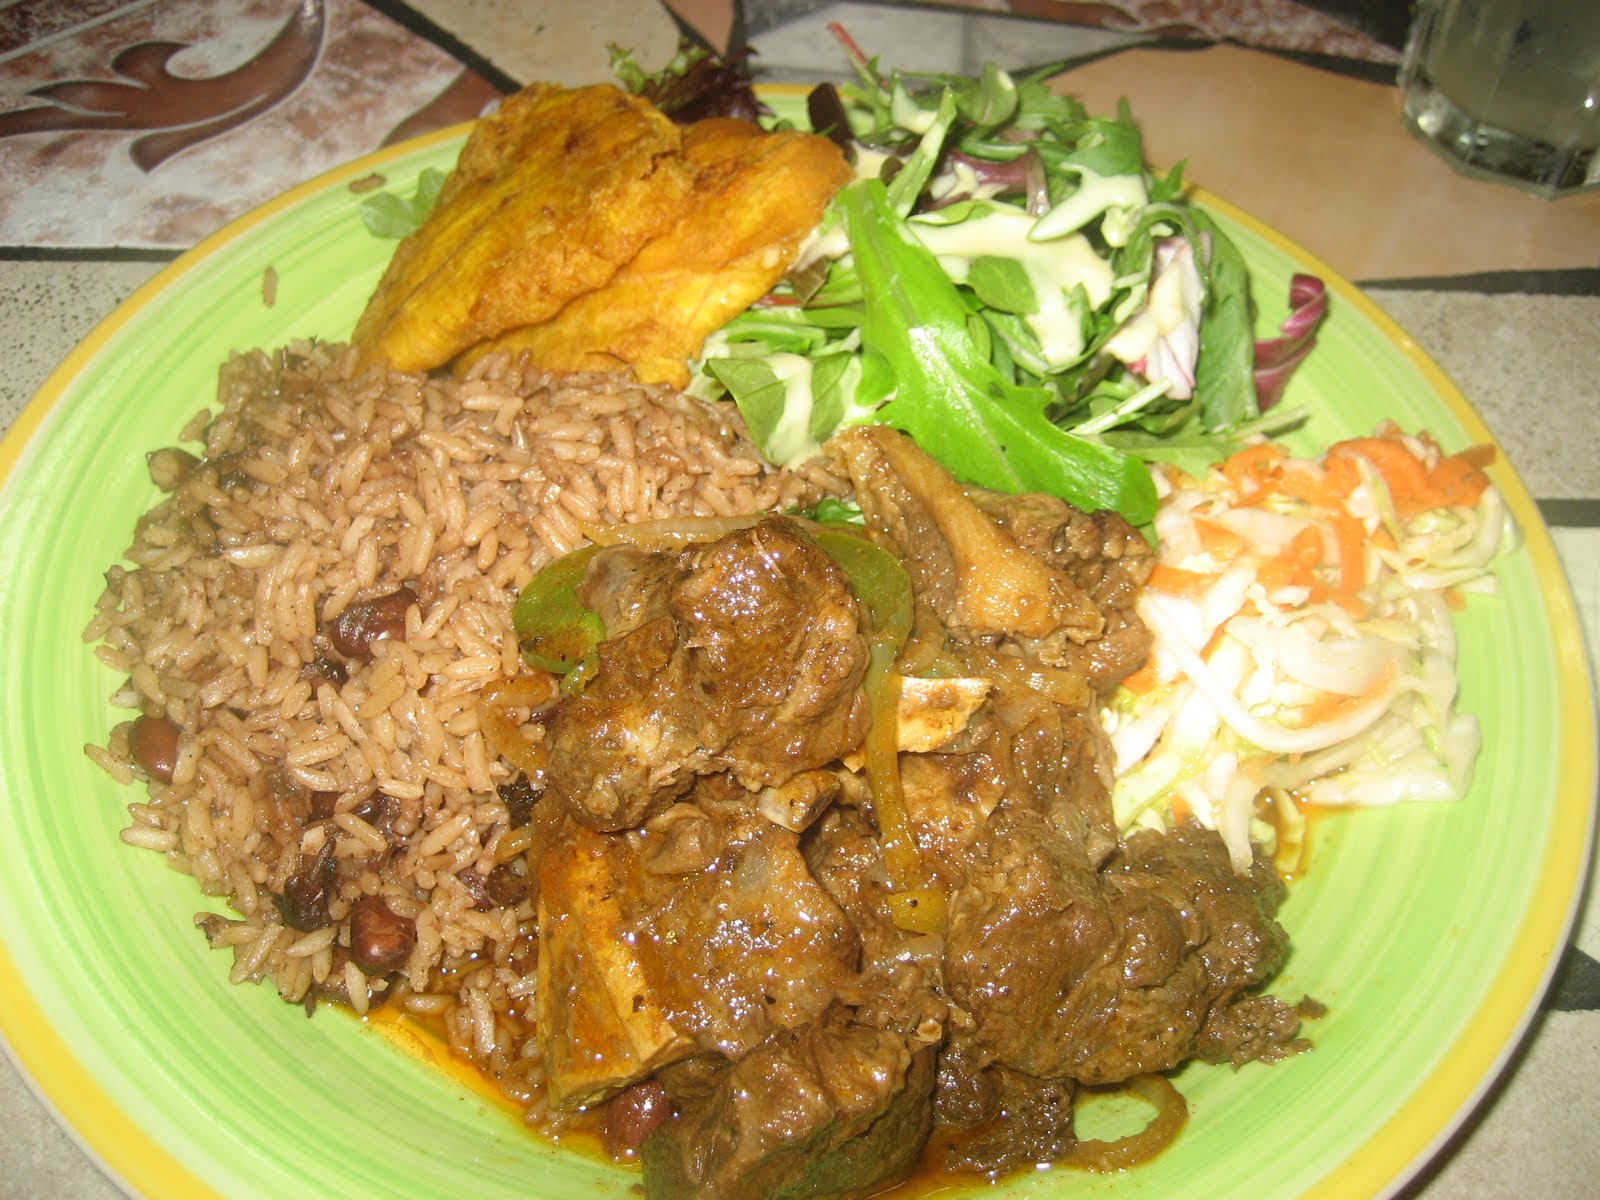 typical haitian meal